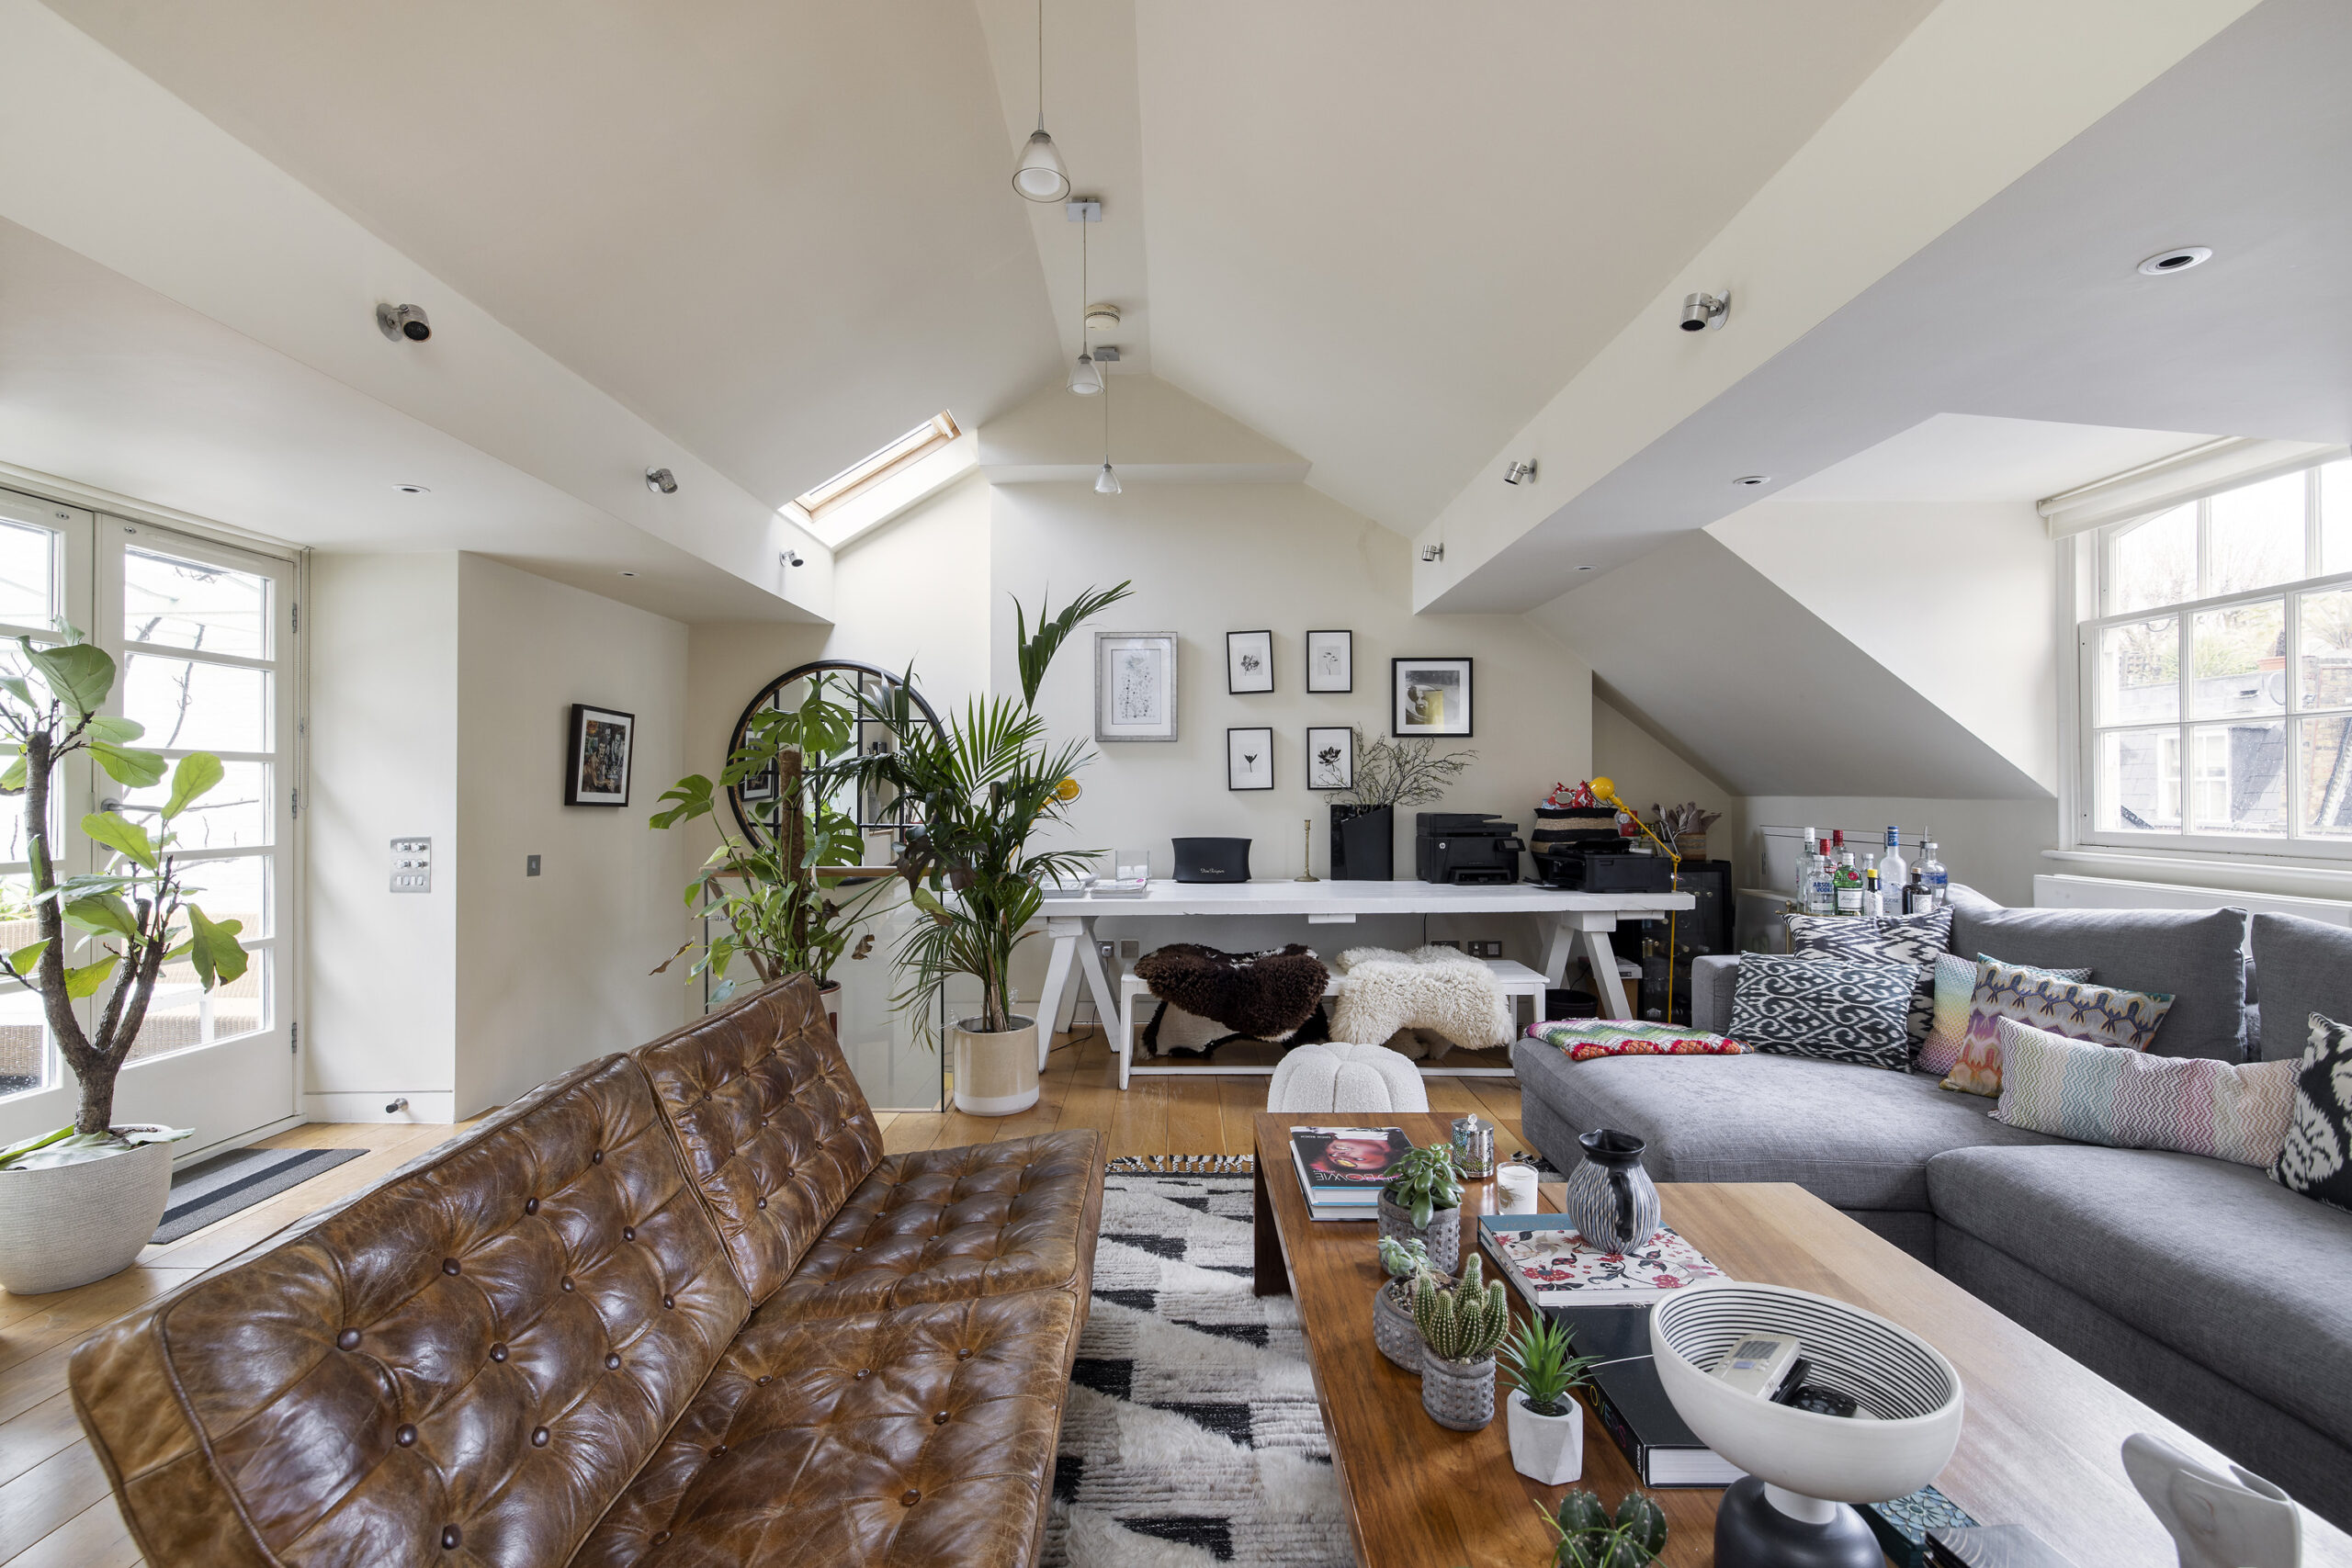 For Rent, Horbury Mews Notting Hill W11 loft style reception room with vaulted ceiling, house plants and leather sofas